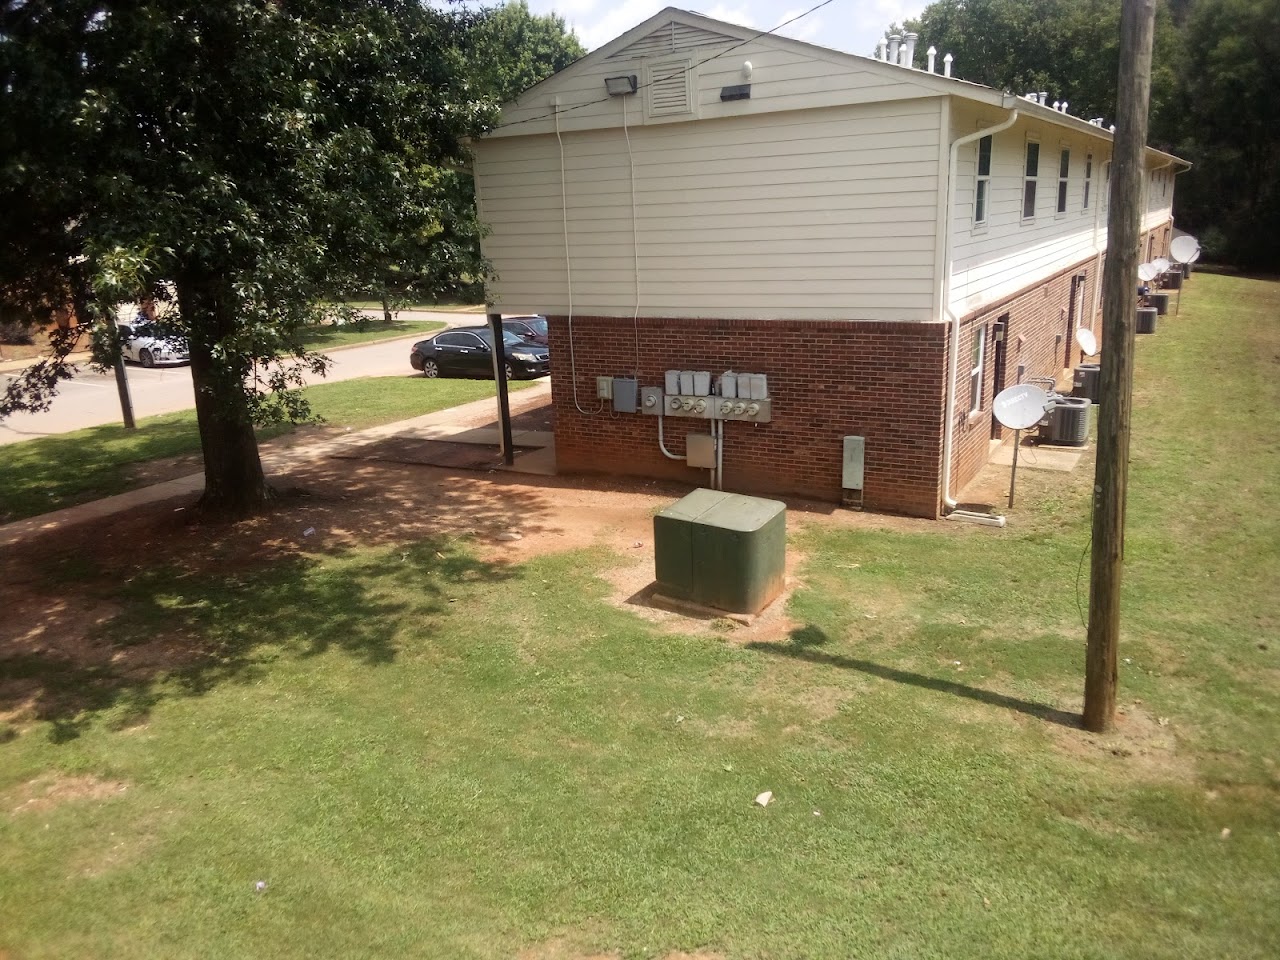 Photo of ATHENS GARDENS APARTMENTS. Affordable housing located at 135 COLERIDGE COURT ATHENS, GA 30605